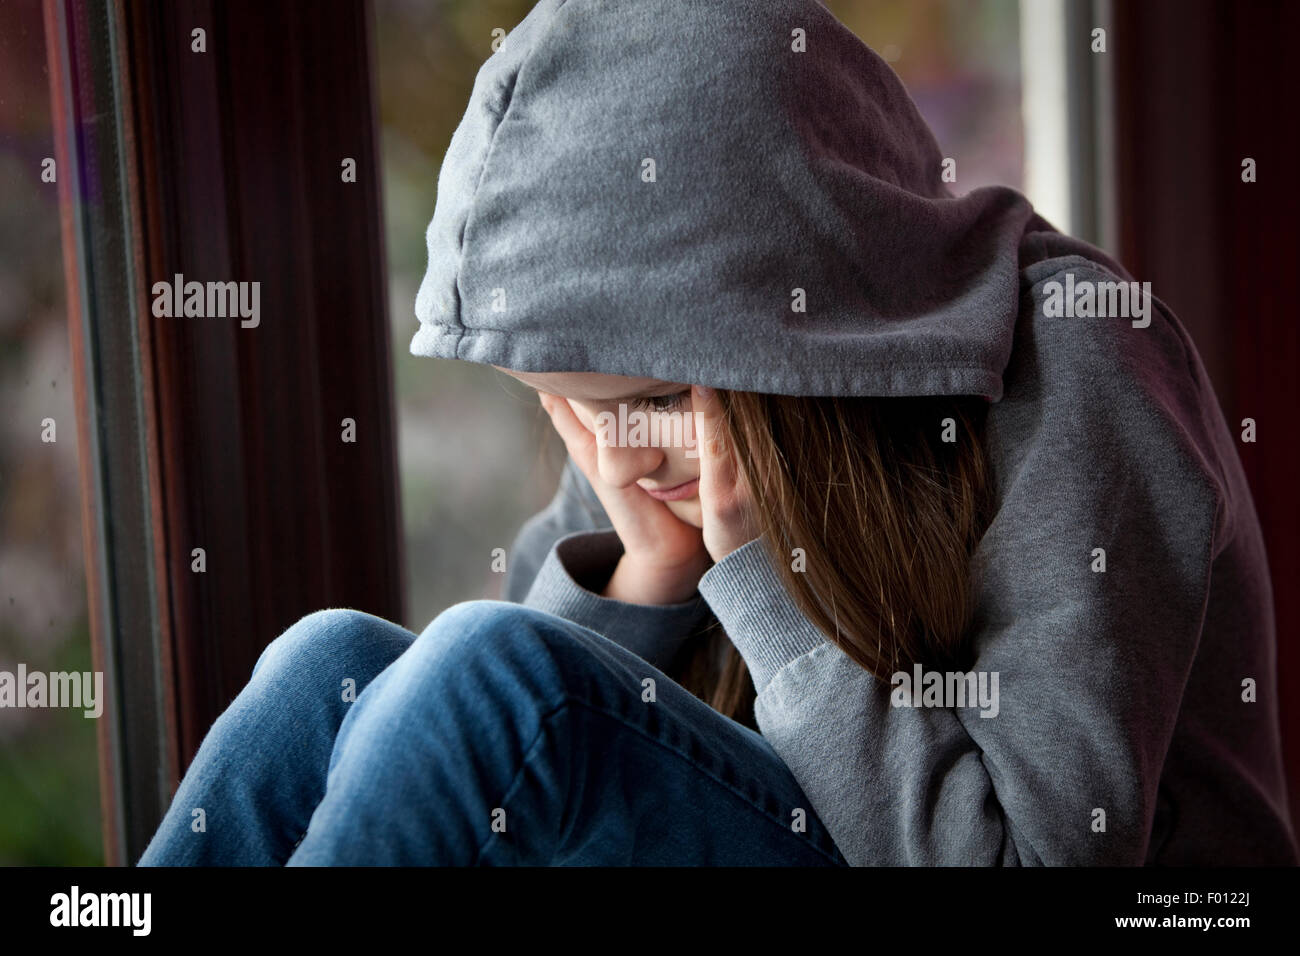 Sad girl in hooded top, sitting with face in hands in despair Stock Photo